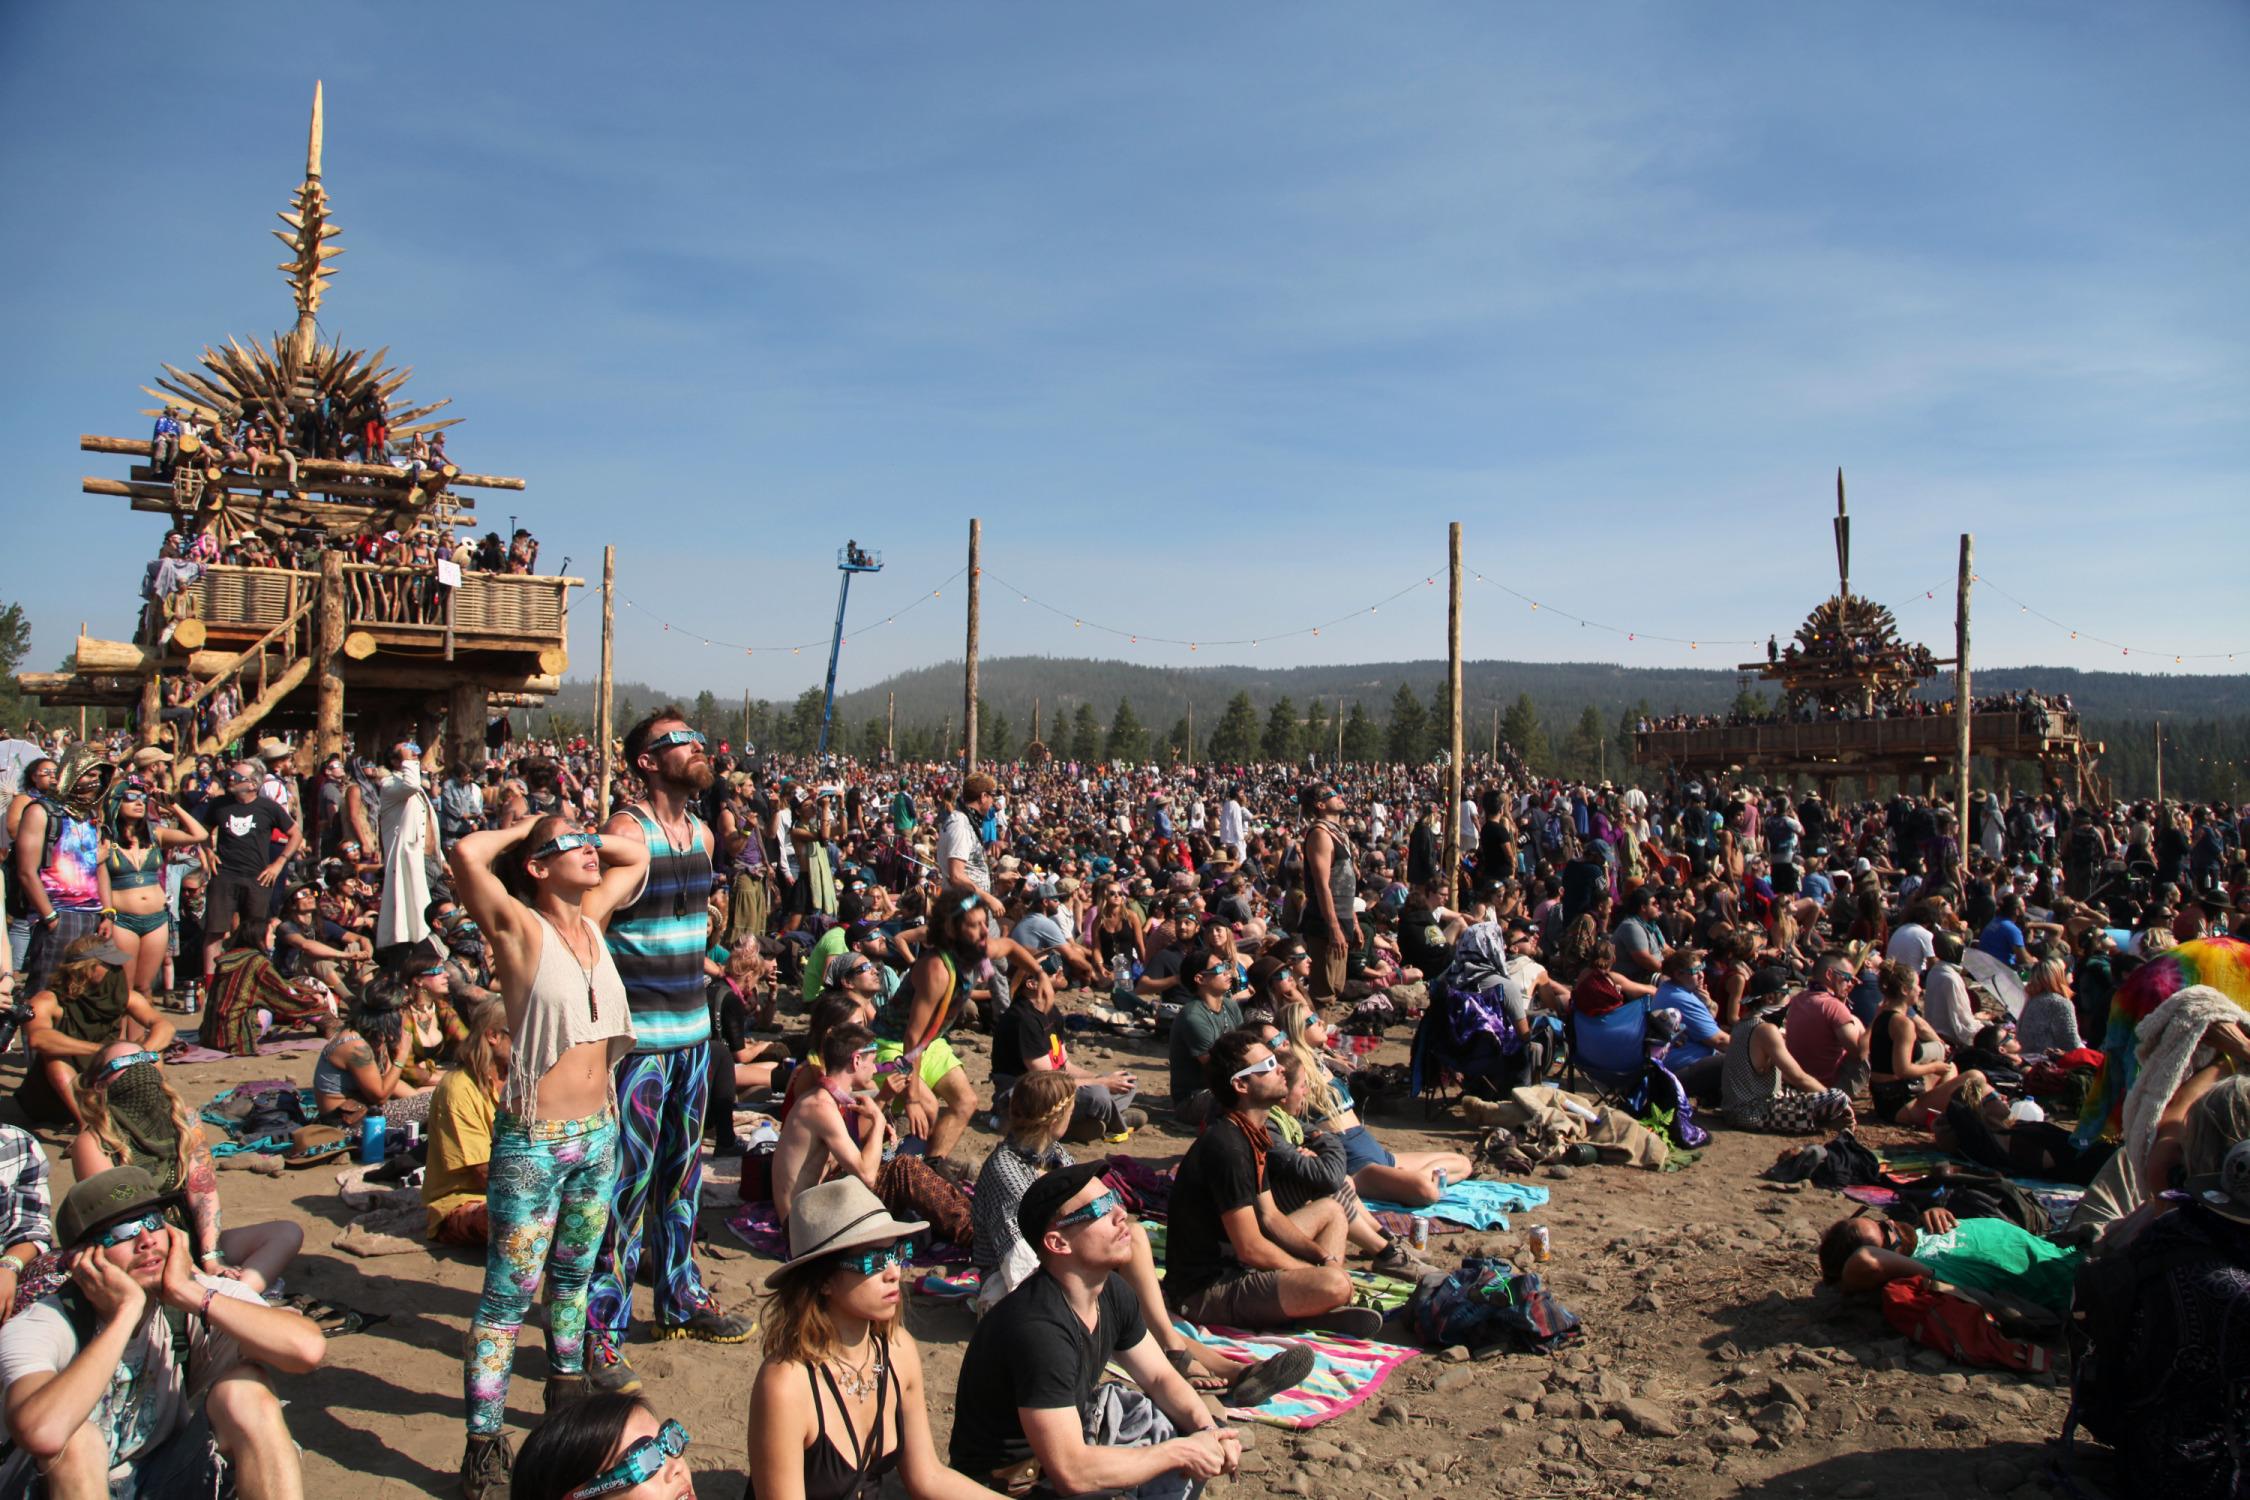 More than 30,000 people gathered to watch the eclipse at the Oregon Eclipse Festival in Central Oregon's Big Summit Prairie.